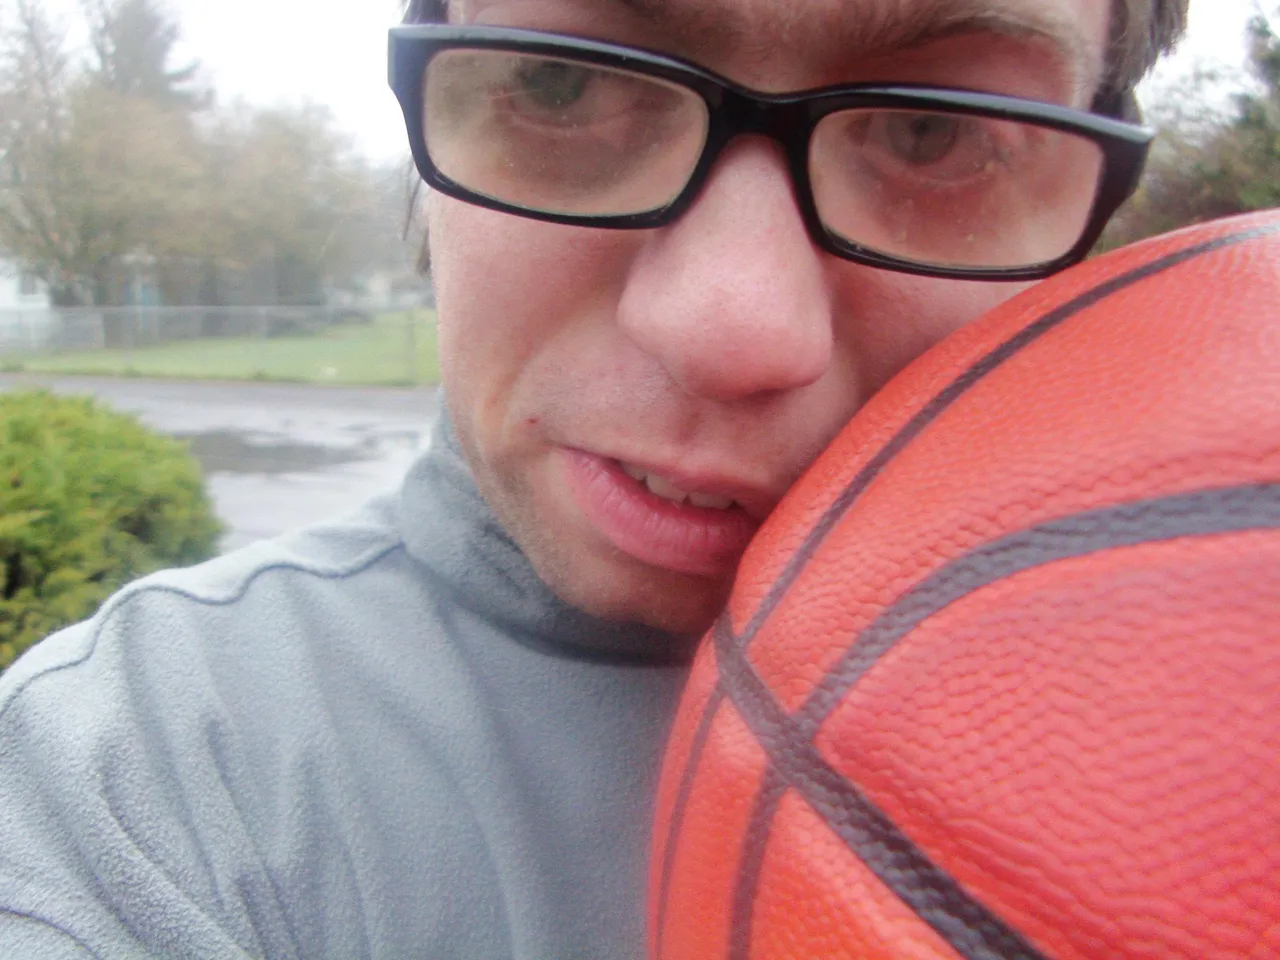 2012-01-24 me with basketball at my park.jpg